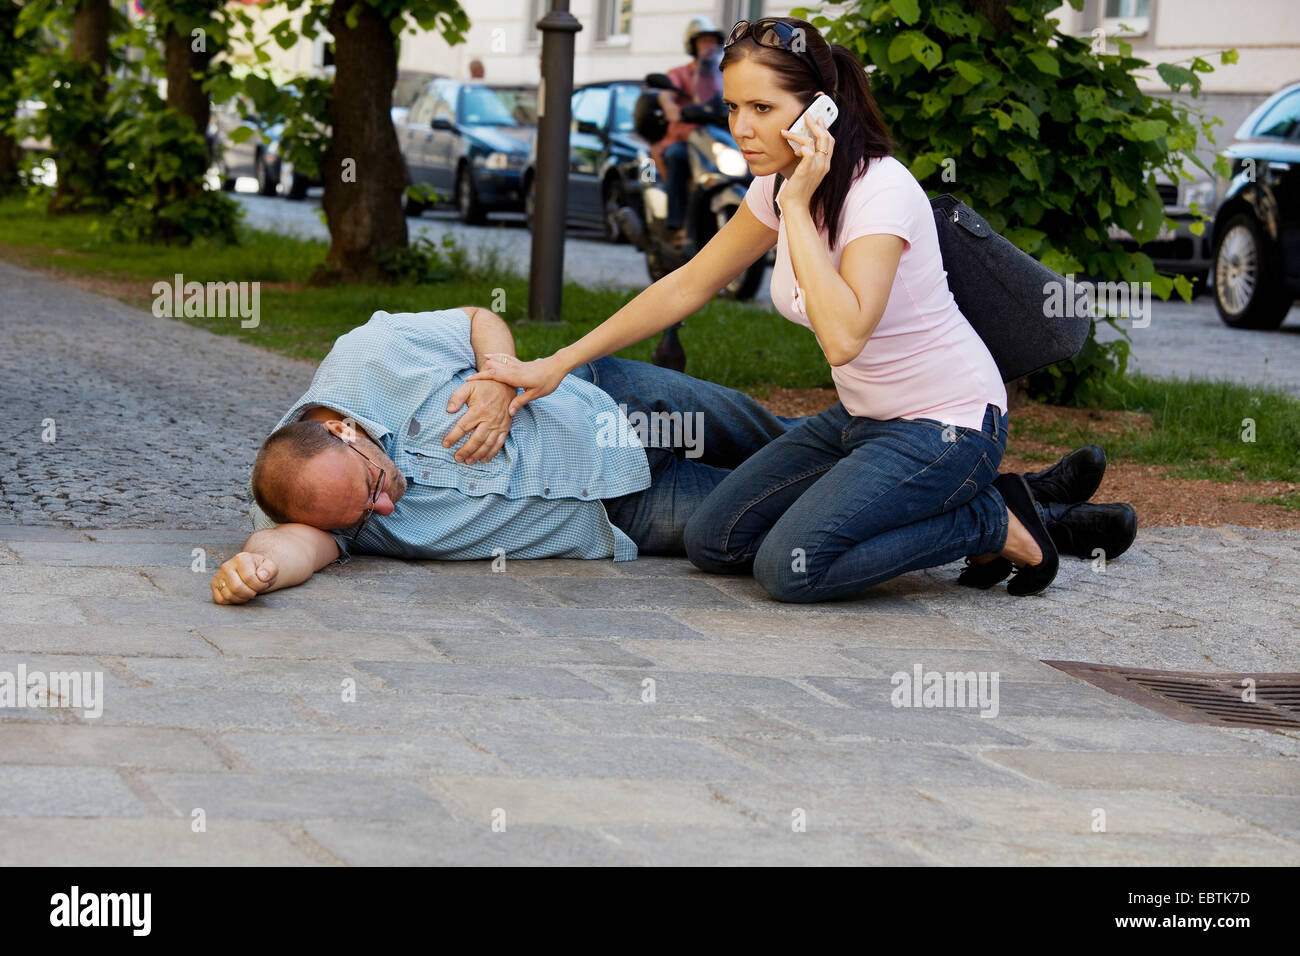 man has a dizzy spell or a heart attack, woman comes to rescue Stock Photo